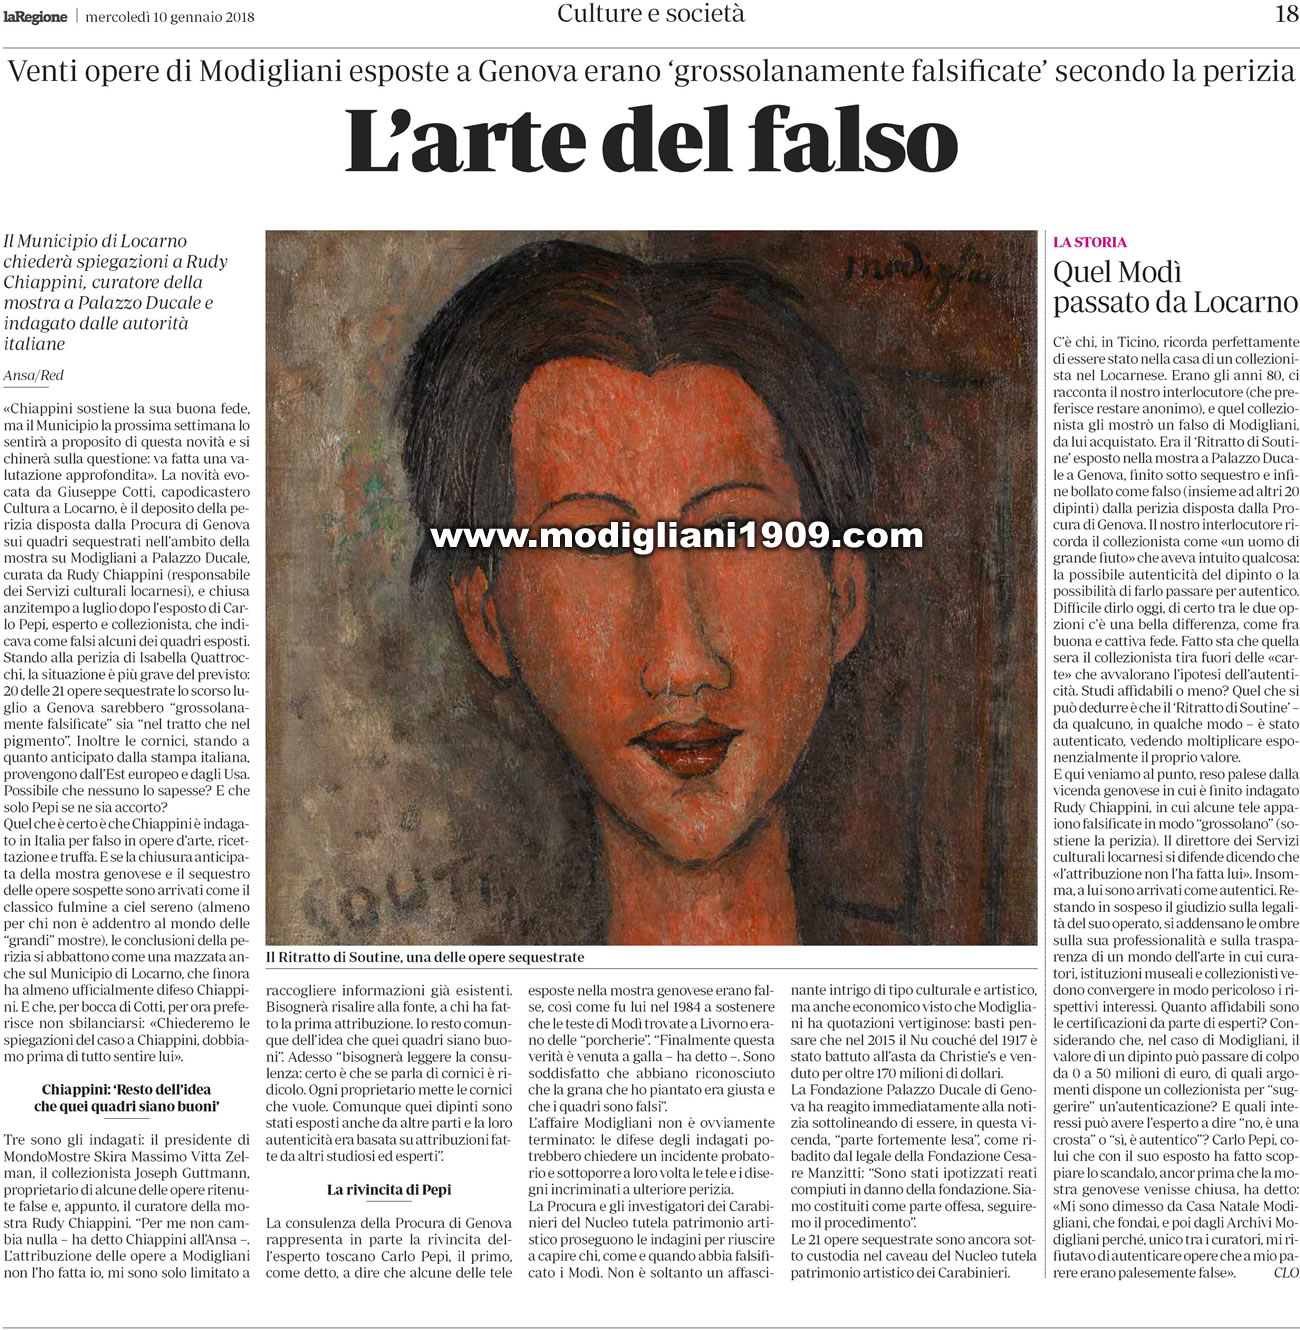 The art of forgery - La Regione